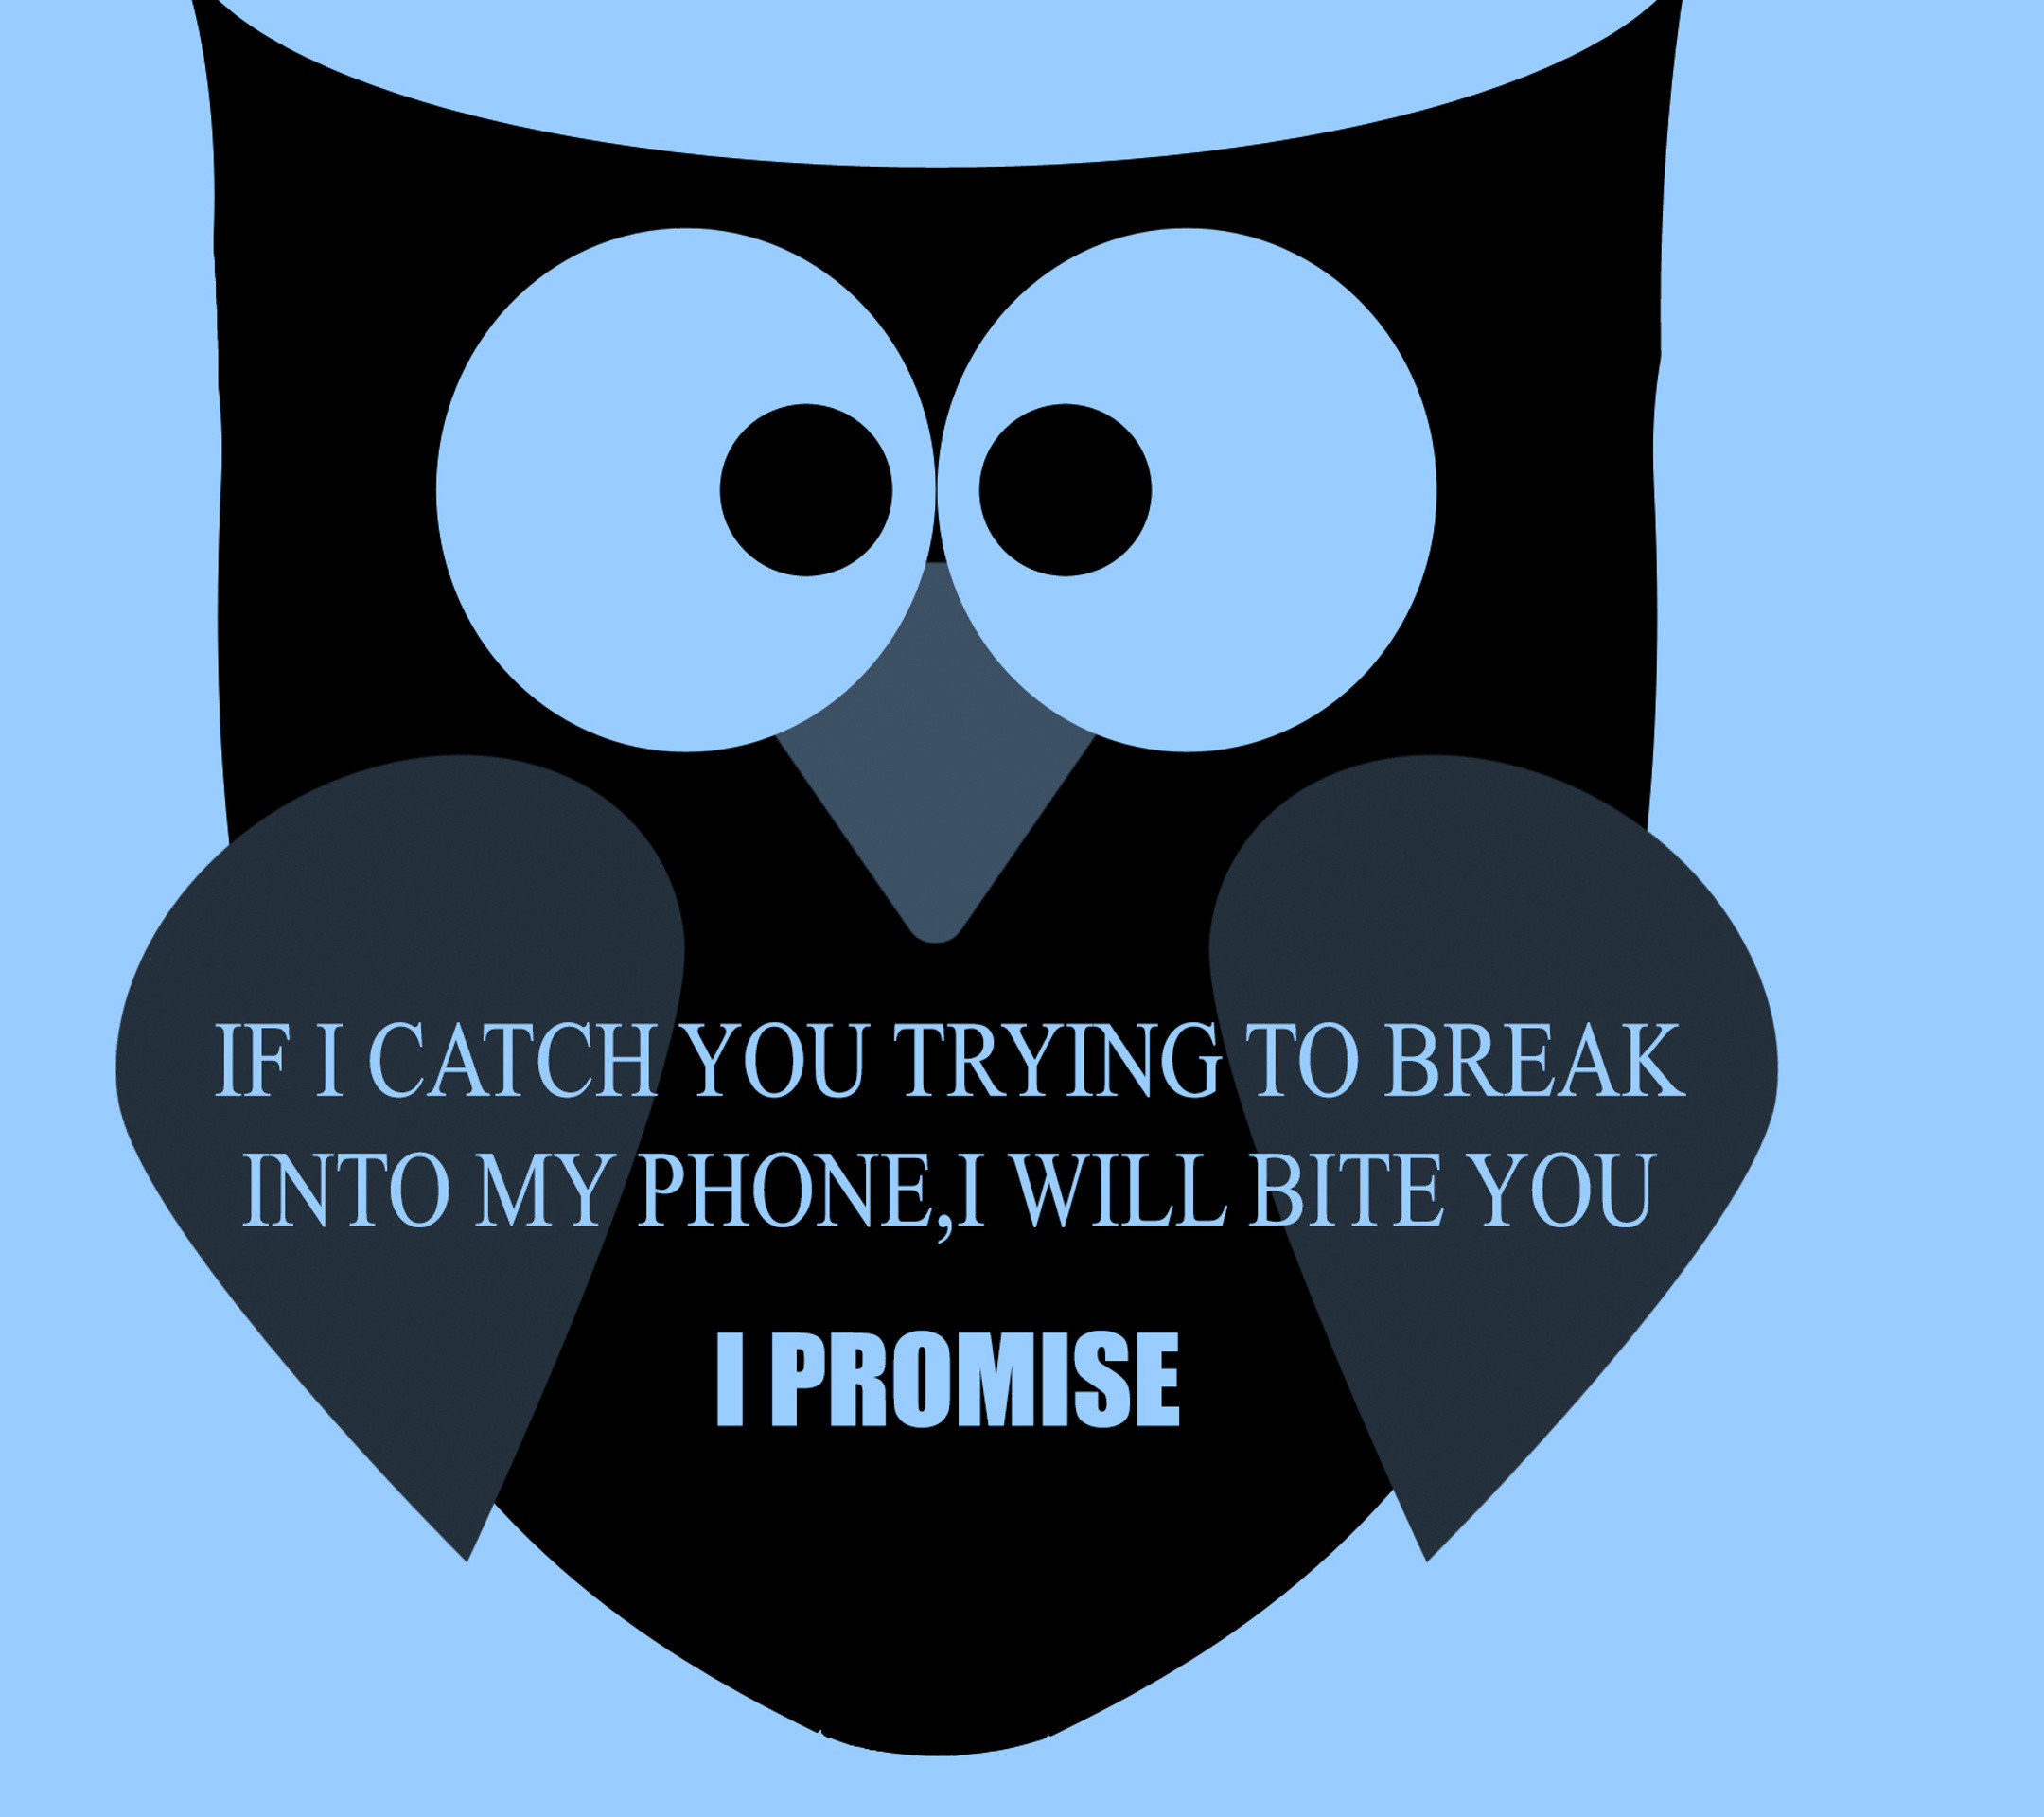 2160x1920 Angry Owl - Tap to see more funny "Don't touch my phone" wallpapers!